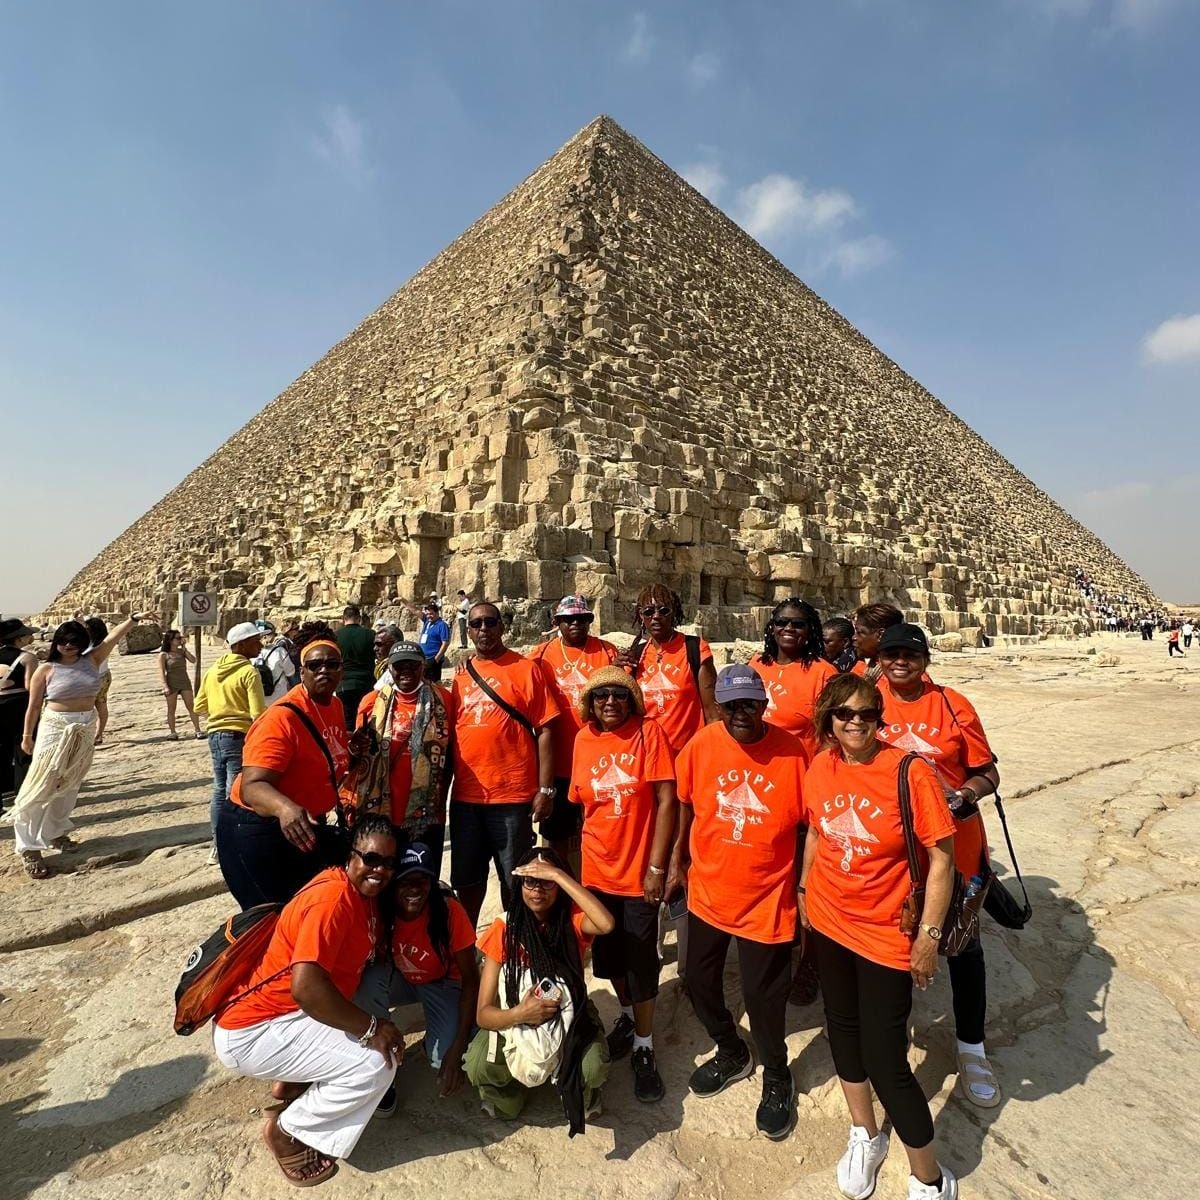 From the land of pharaohs to your feed: Overton Travel takes on Egypt's wonders! 🇪🇬✈️ 

#OvertonAdventures #EgyptianEscape #TravelDreams